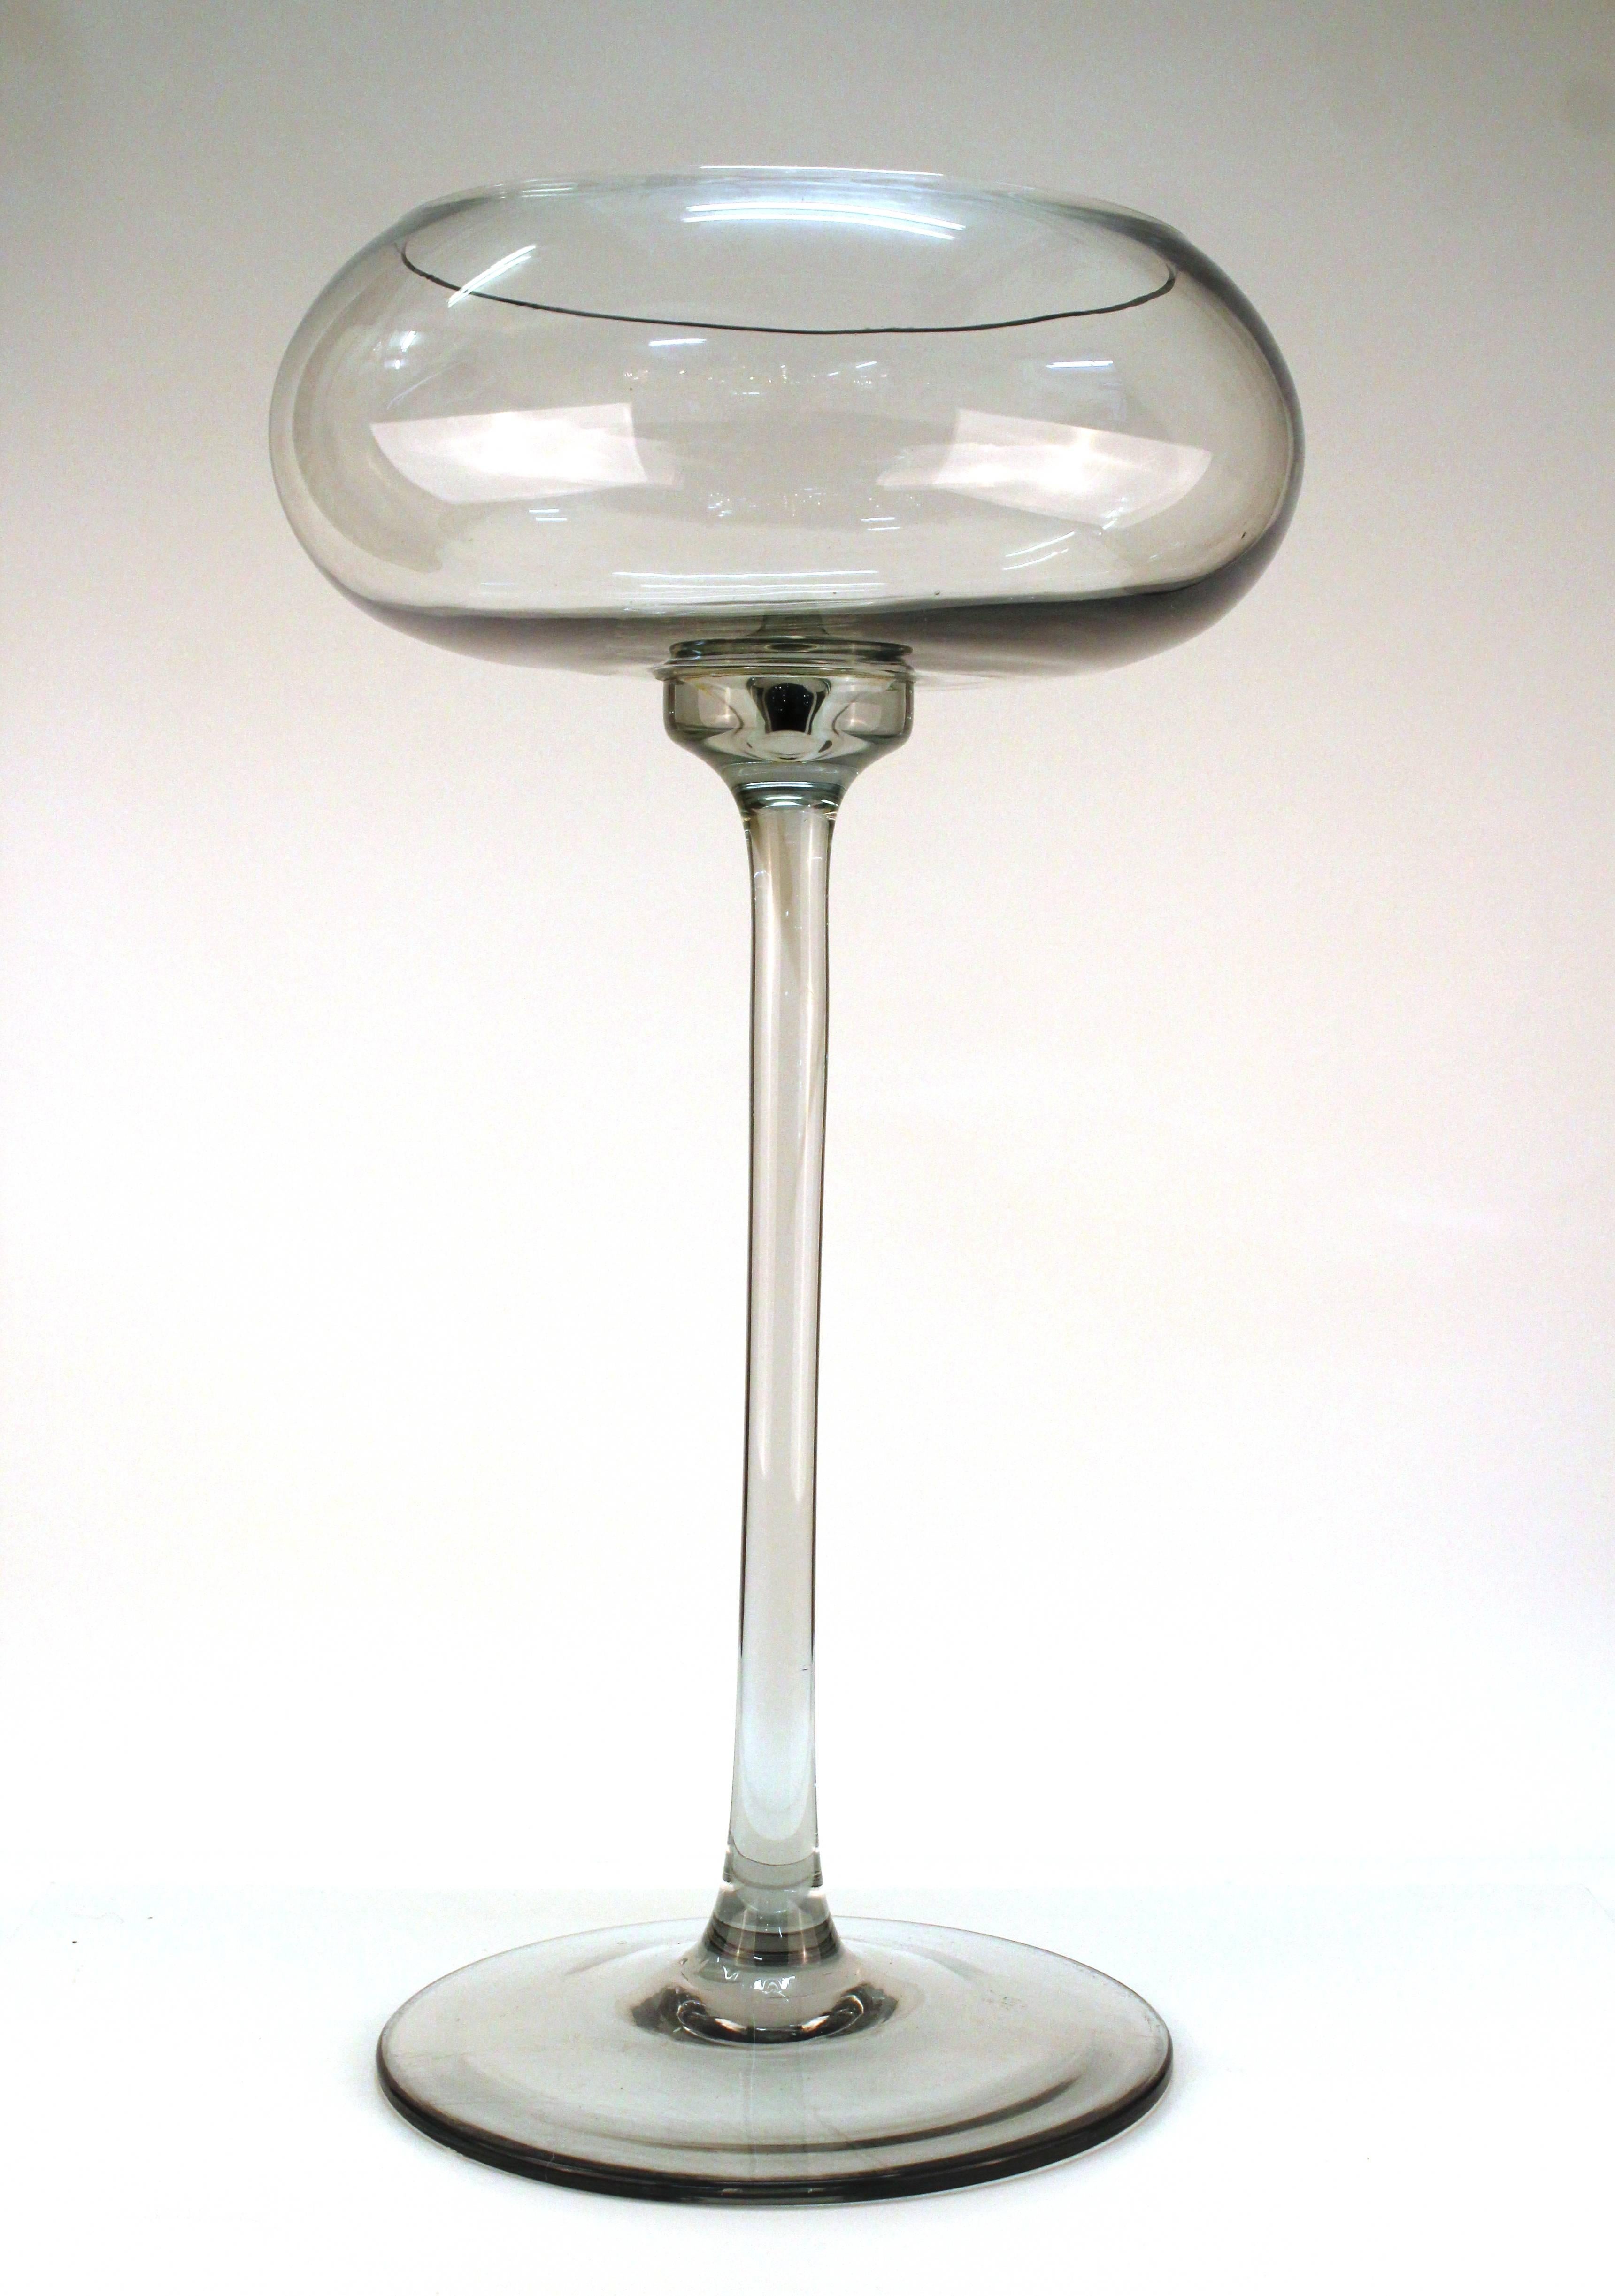 A large cocktail glass on a round base. Featuring a round deep cup perfect for using as an ice bucket or statement piece. The glass is in good condition.